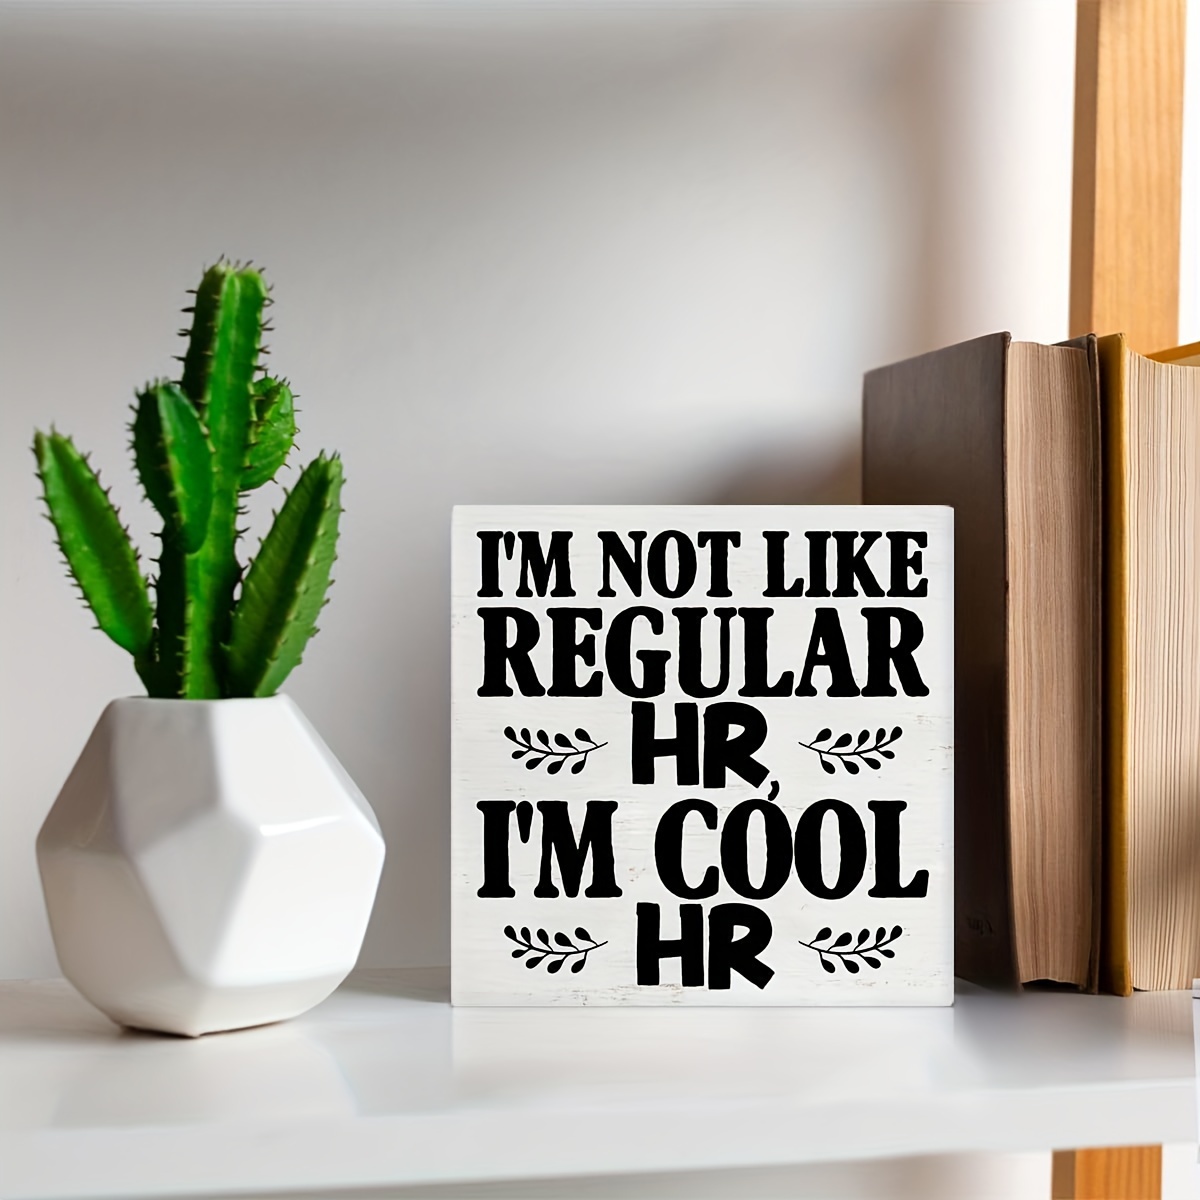 Funny HR Wooden Box Sign But Did You Document It Desk Decorative Wooden  Sign Office Decor for Desk Table Shelf 5 x 5 Inches